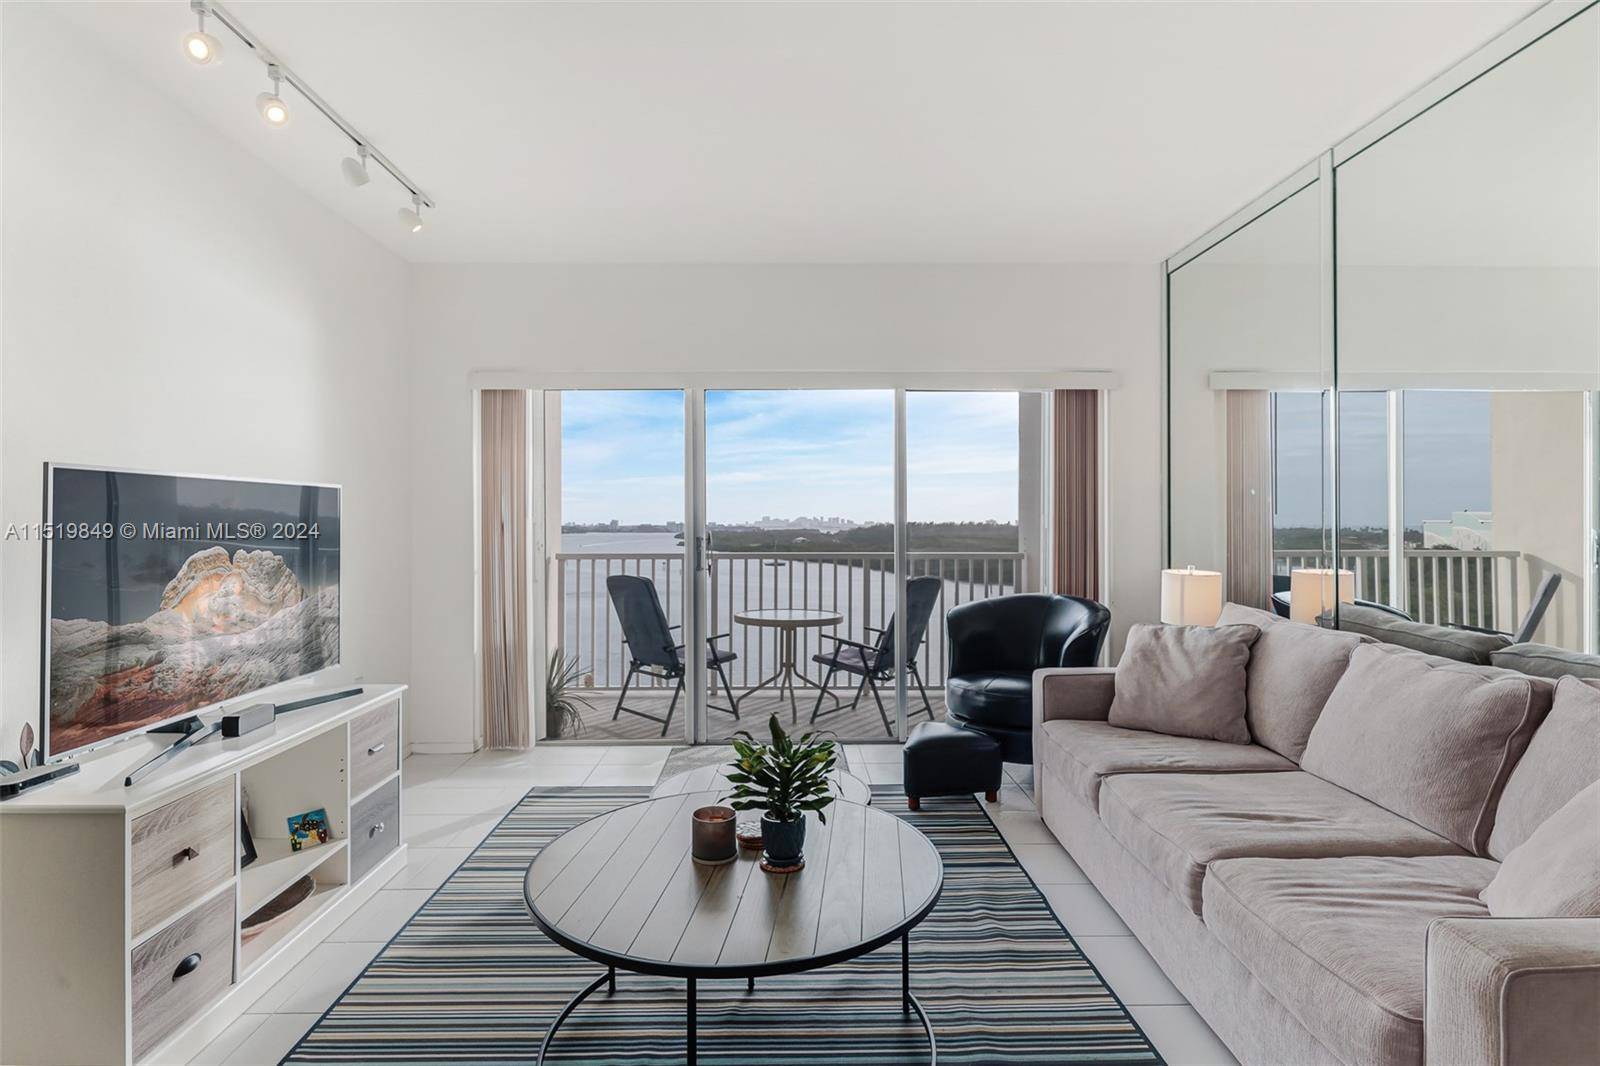 Indulge in the coastal living with this meticulously crafted 1 bedroom, 1.